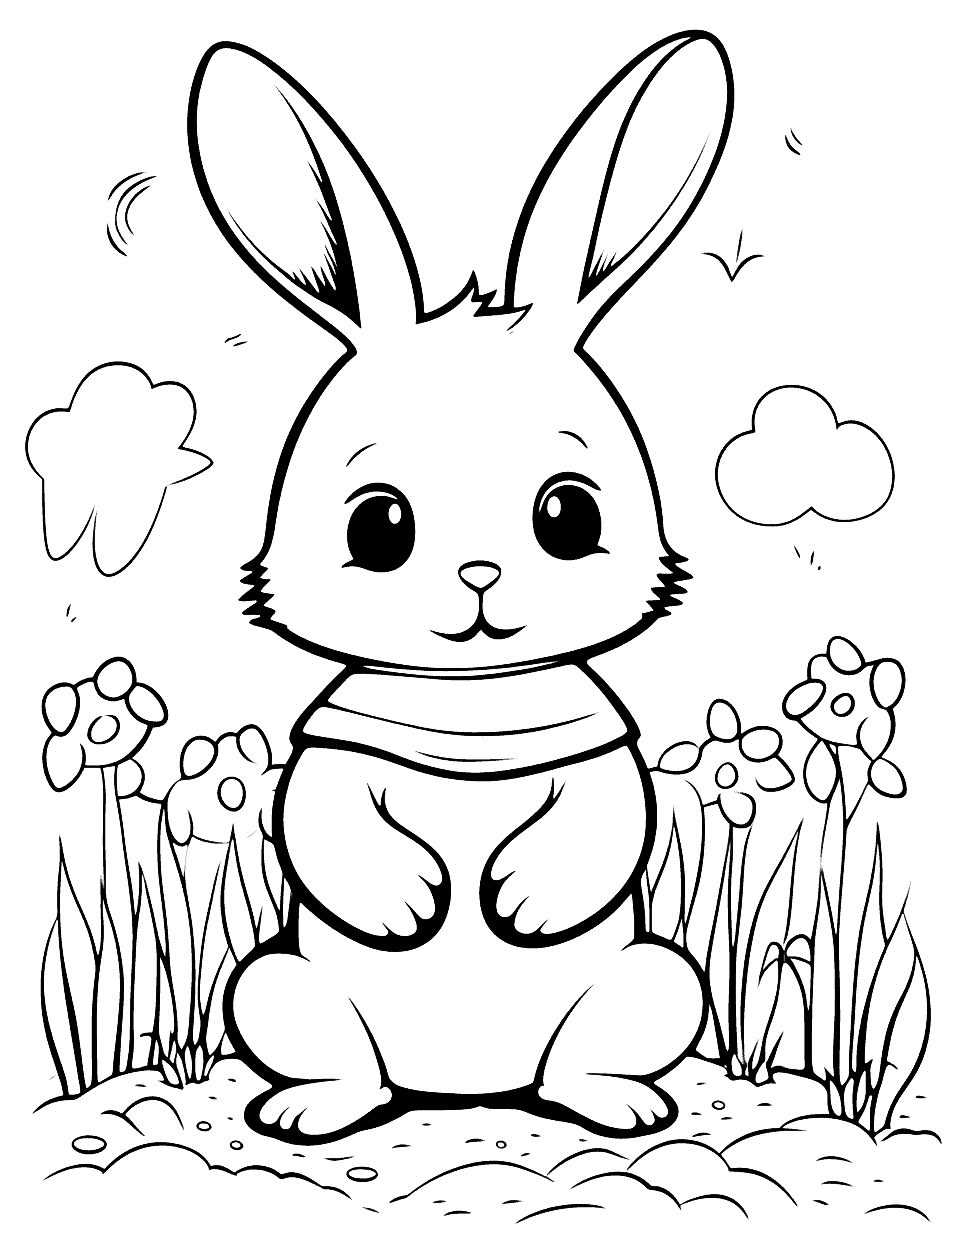 Bunny's Zen Moment Bunny Coloring Page - A bunny sitting in a meditative pose amidst a peaceful garden, embodying calmness.